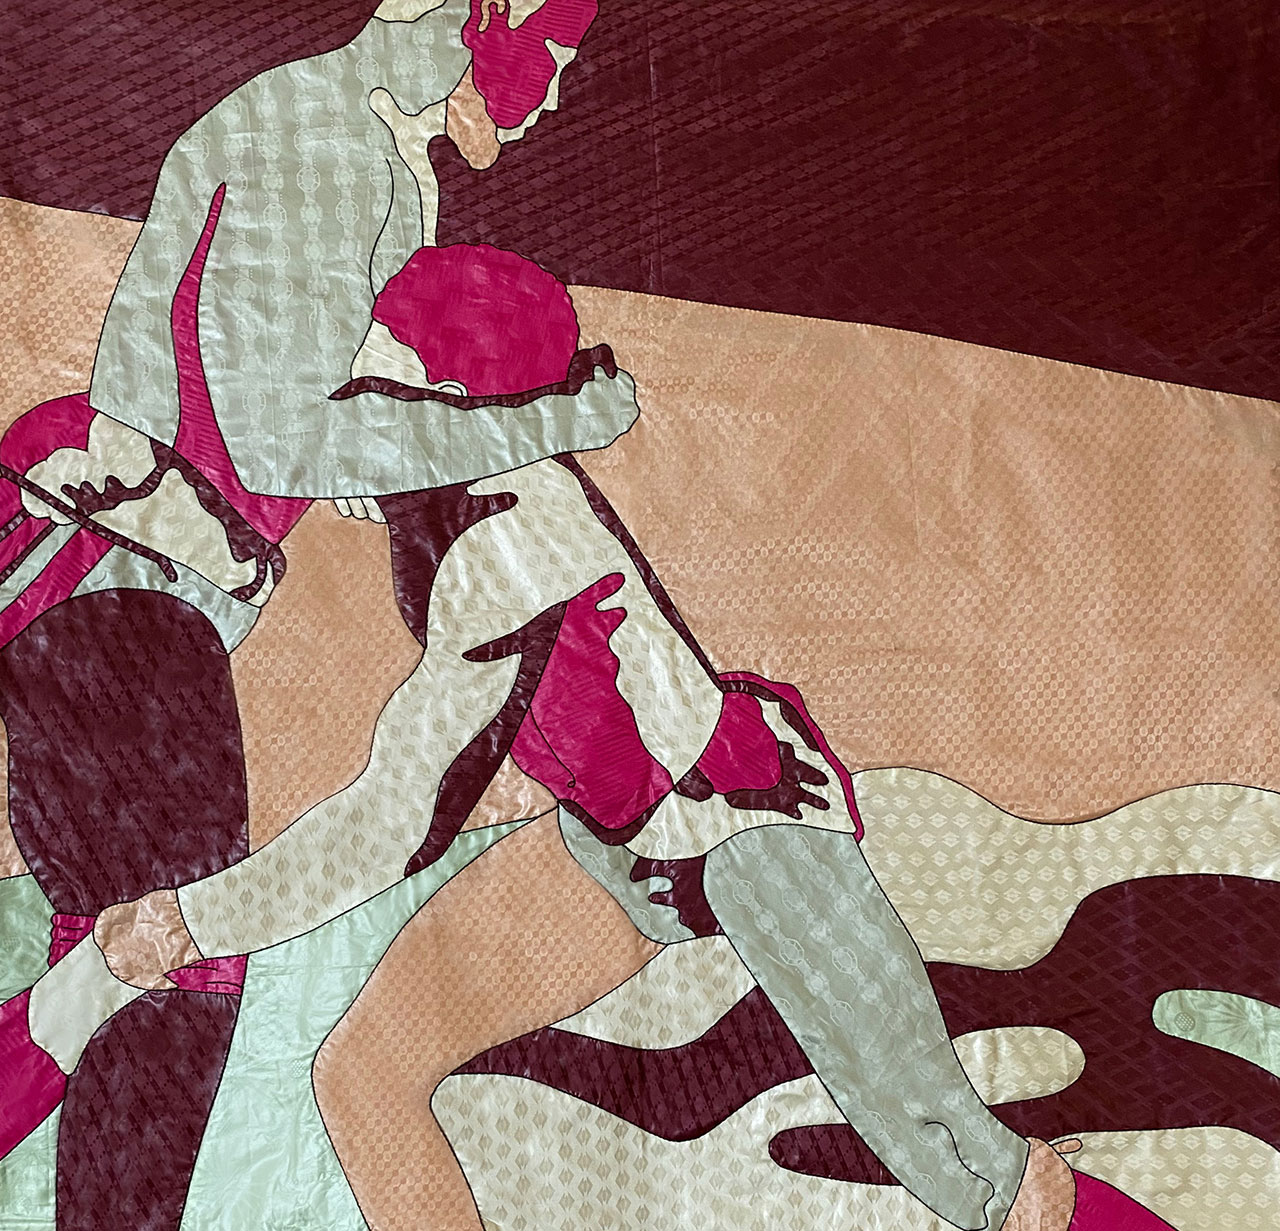 Louis Barthélemy, KHAYAMIYA 16 - CONFRONTATION from the Lutteurs/Wrestlers series, 2021. Appliquéd and hand embroidered «bazins» on cotton canvas. Unique edition.